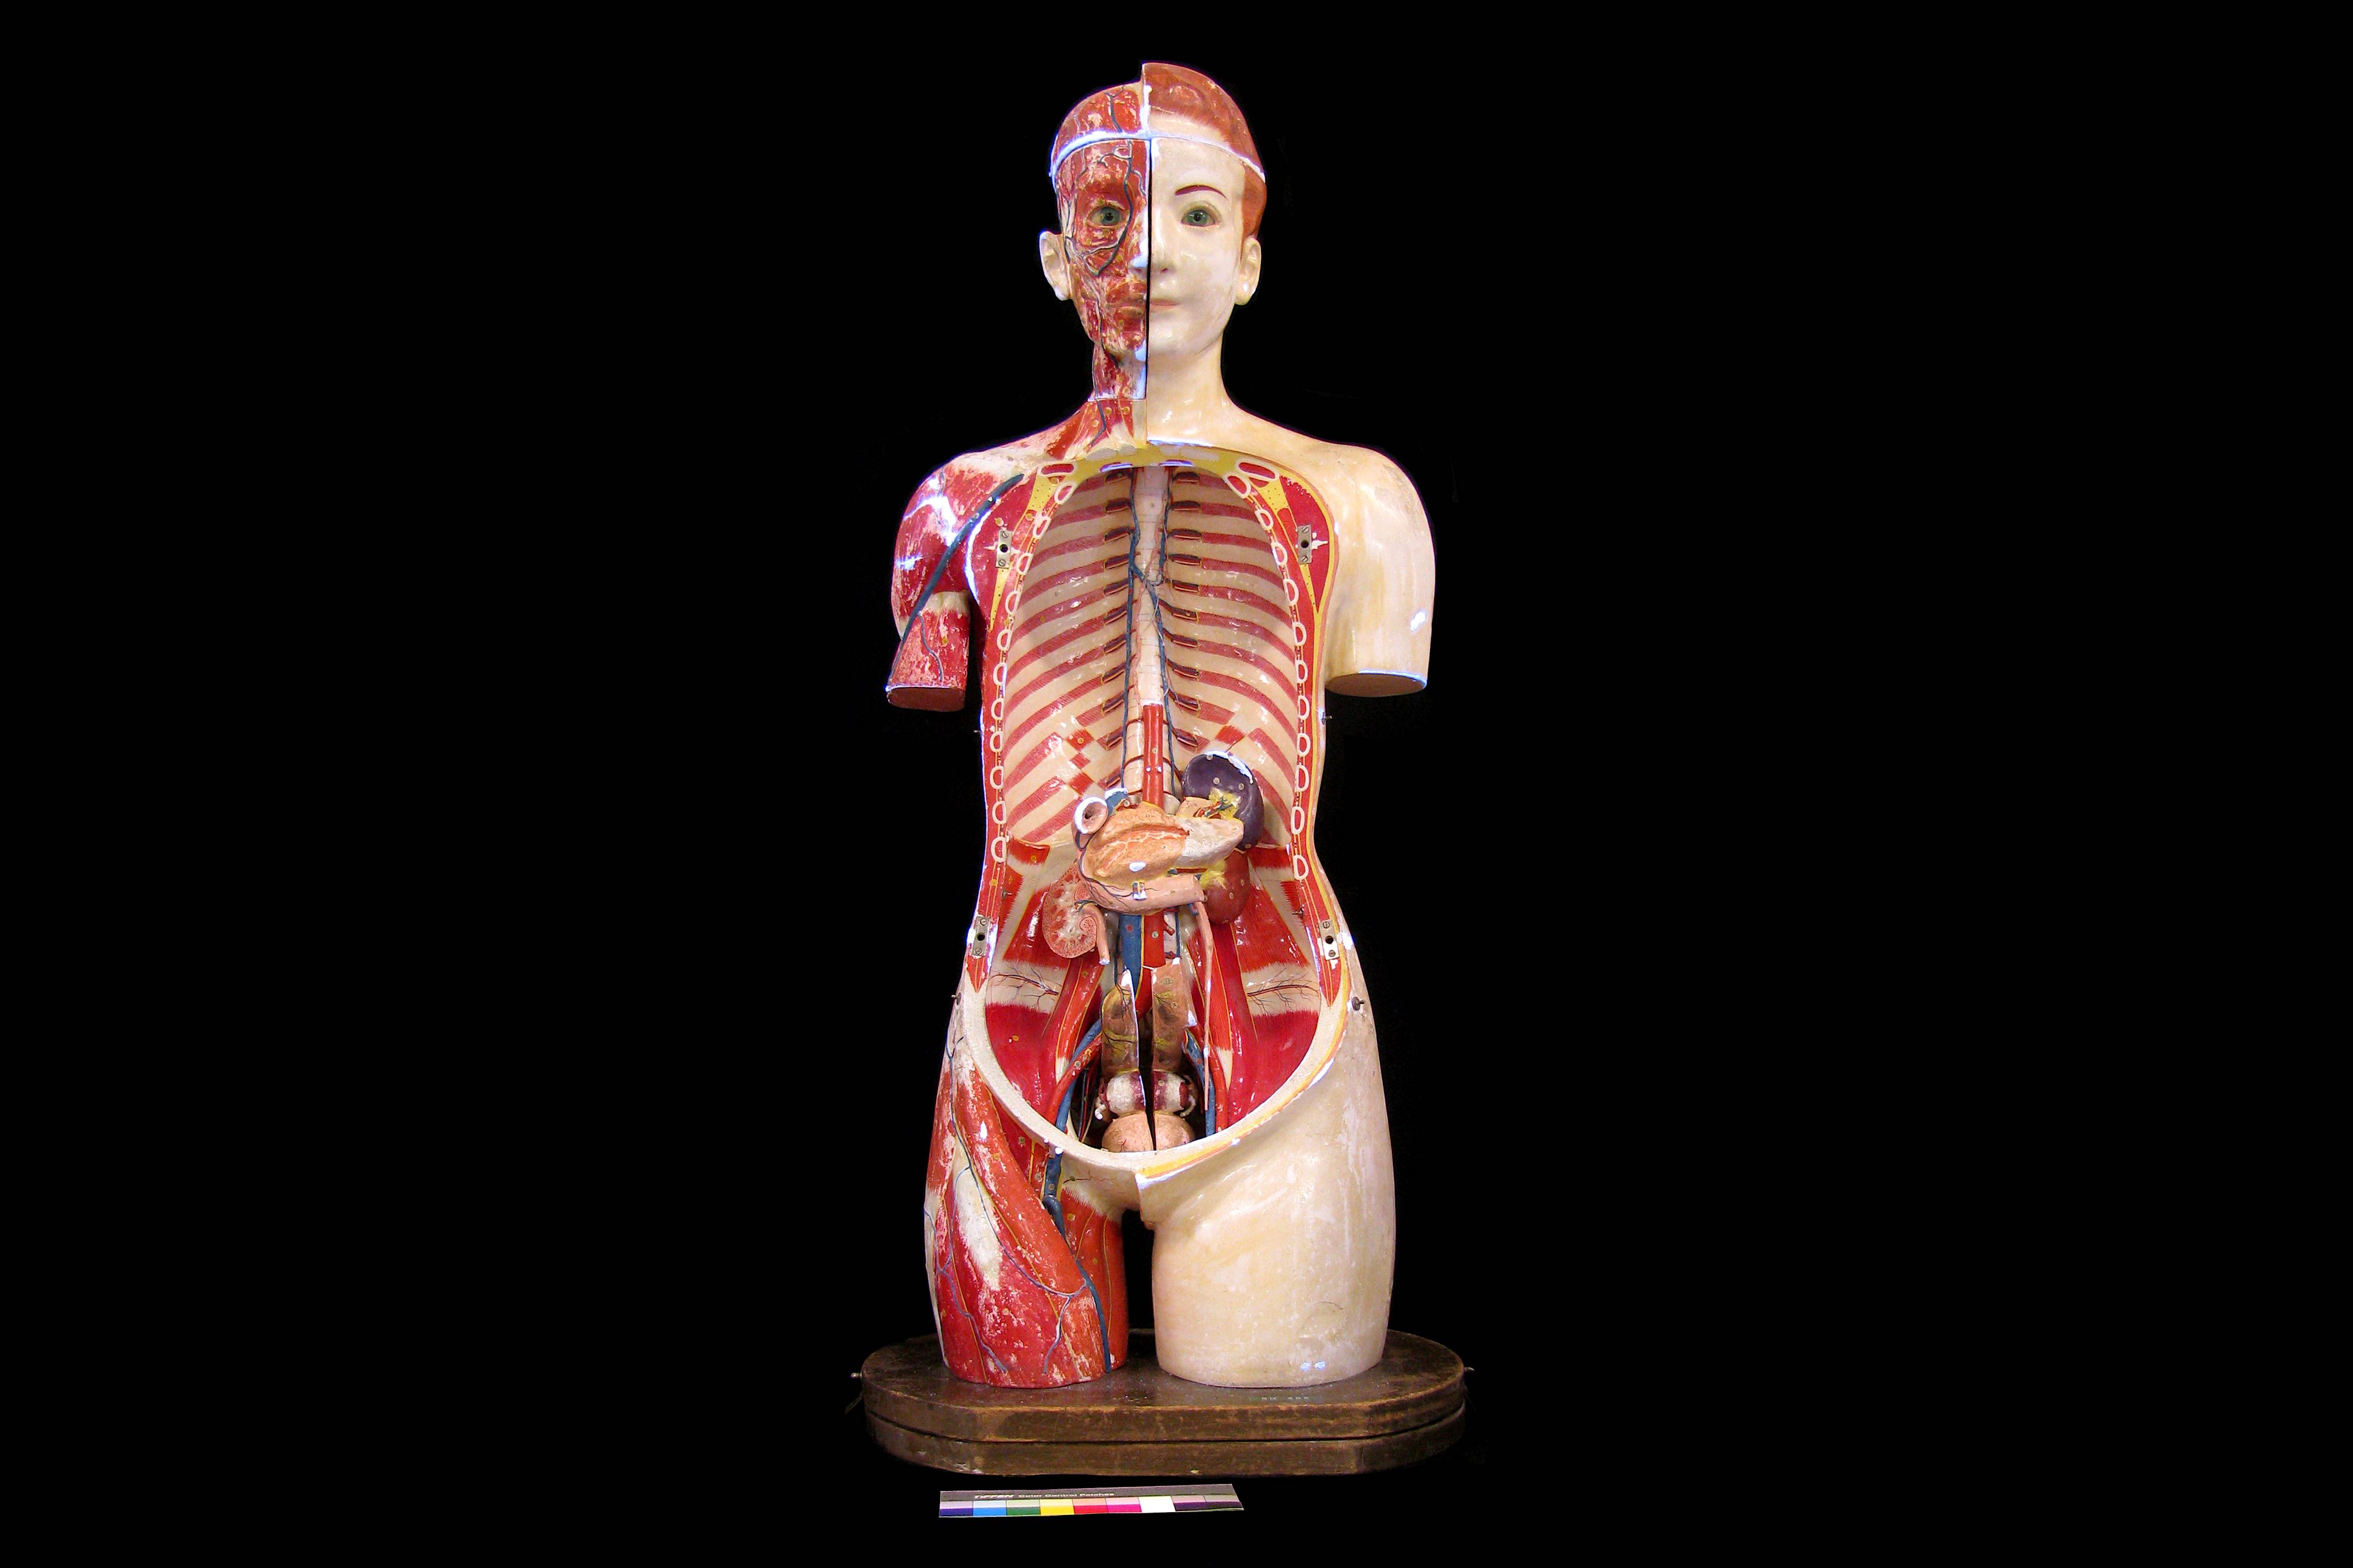 A FINE 1930'S JAPANESE LIFE-SIZE ANATOMICAL MODEL TORSO OF THE FEMALE FIGURE PRODUCED IN 1934 BY THE - Image 9 of 9